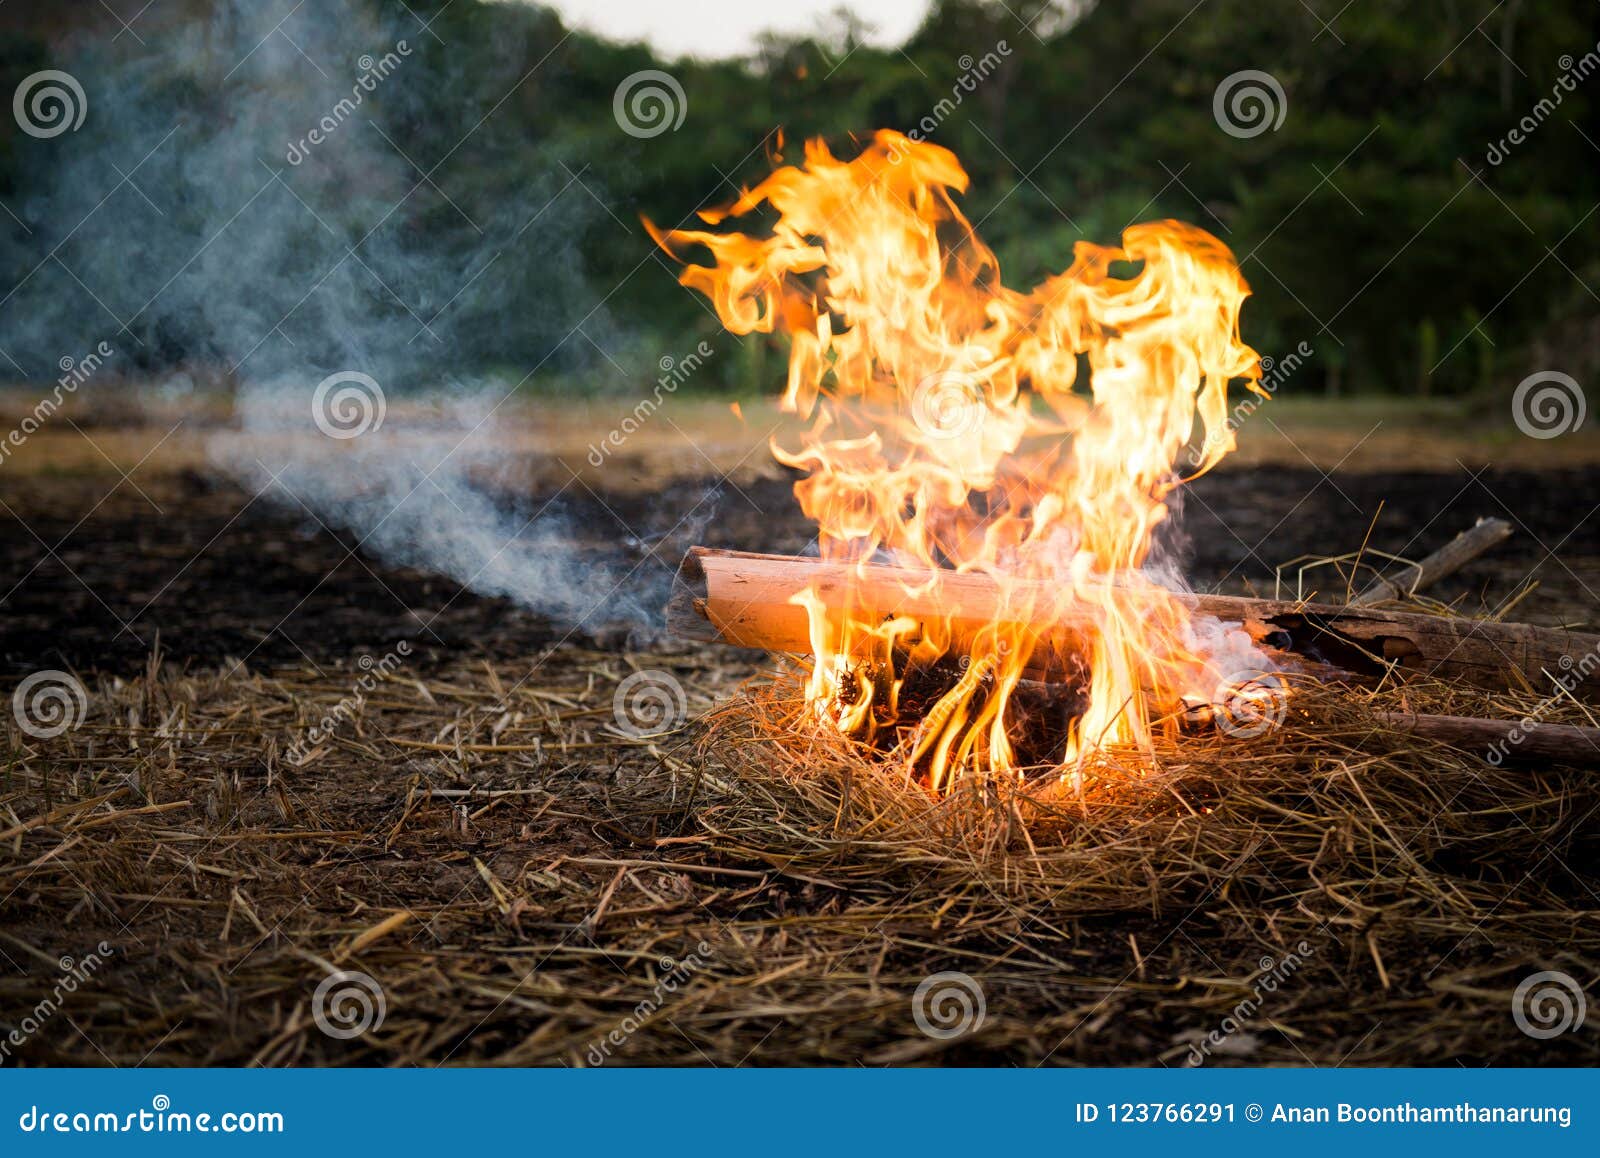 Camping fire on the ground stock image. Image of black - 123766291